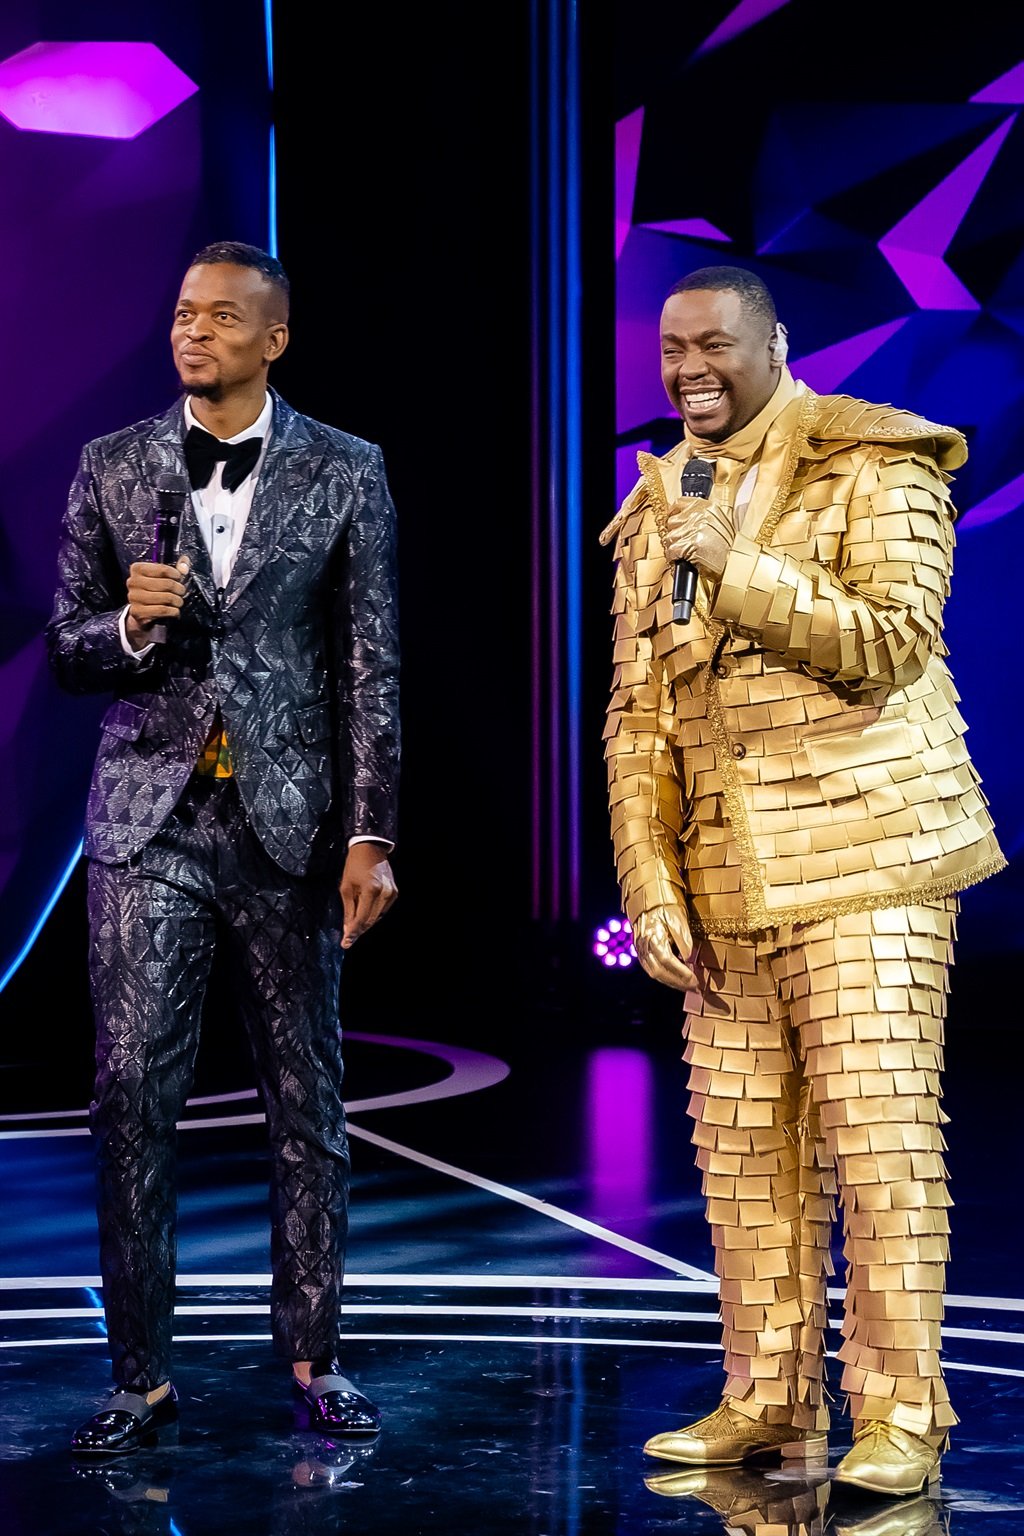  The Masked Singer South Africa Season 2 finale. 